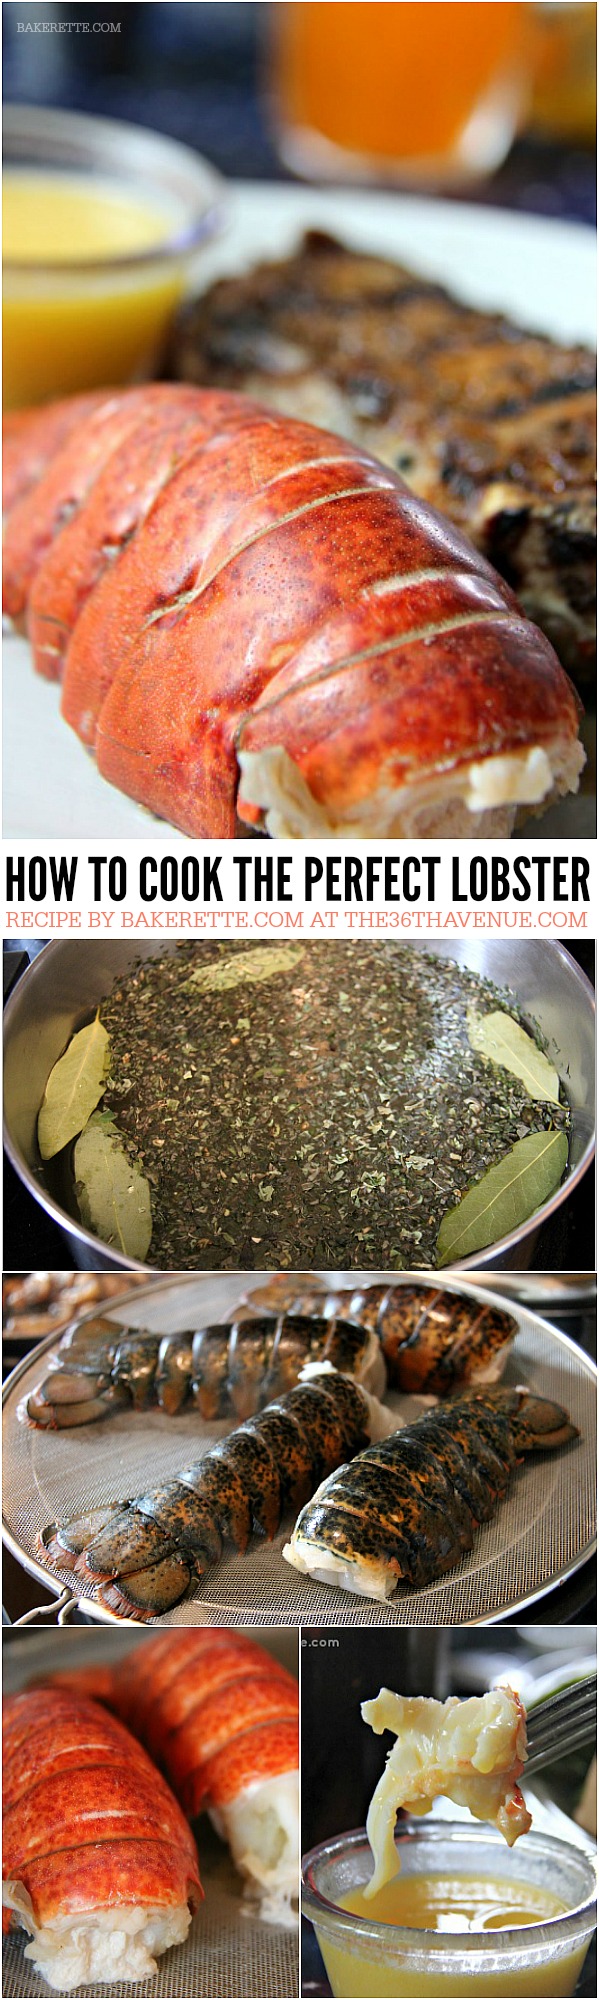 Best Recipes on Pinterest - How to Cook the Perfect Lobster every time. Such an easy, quick and delicious recipe! 